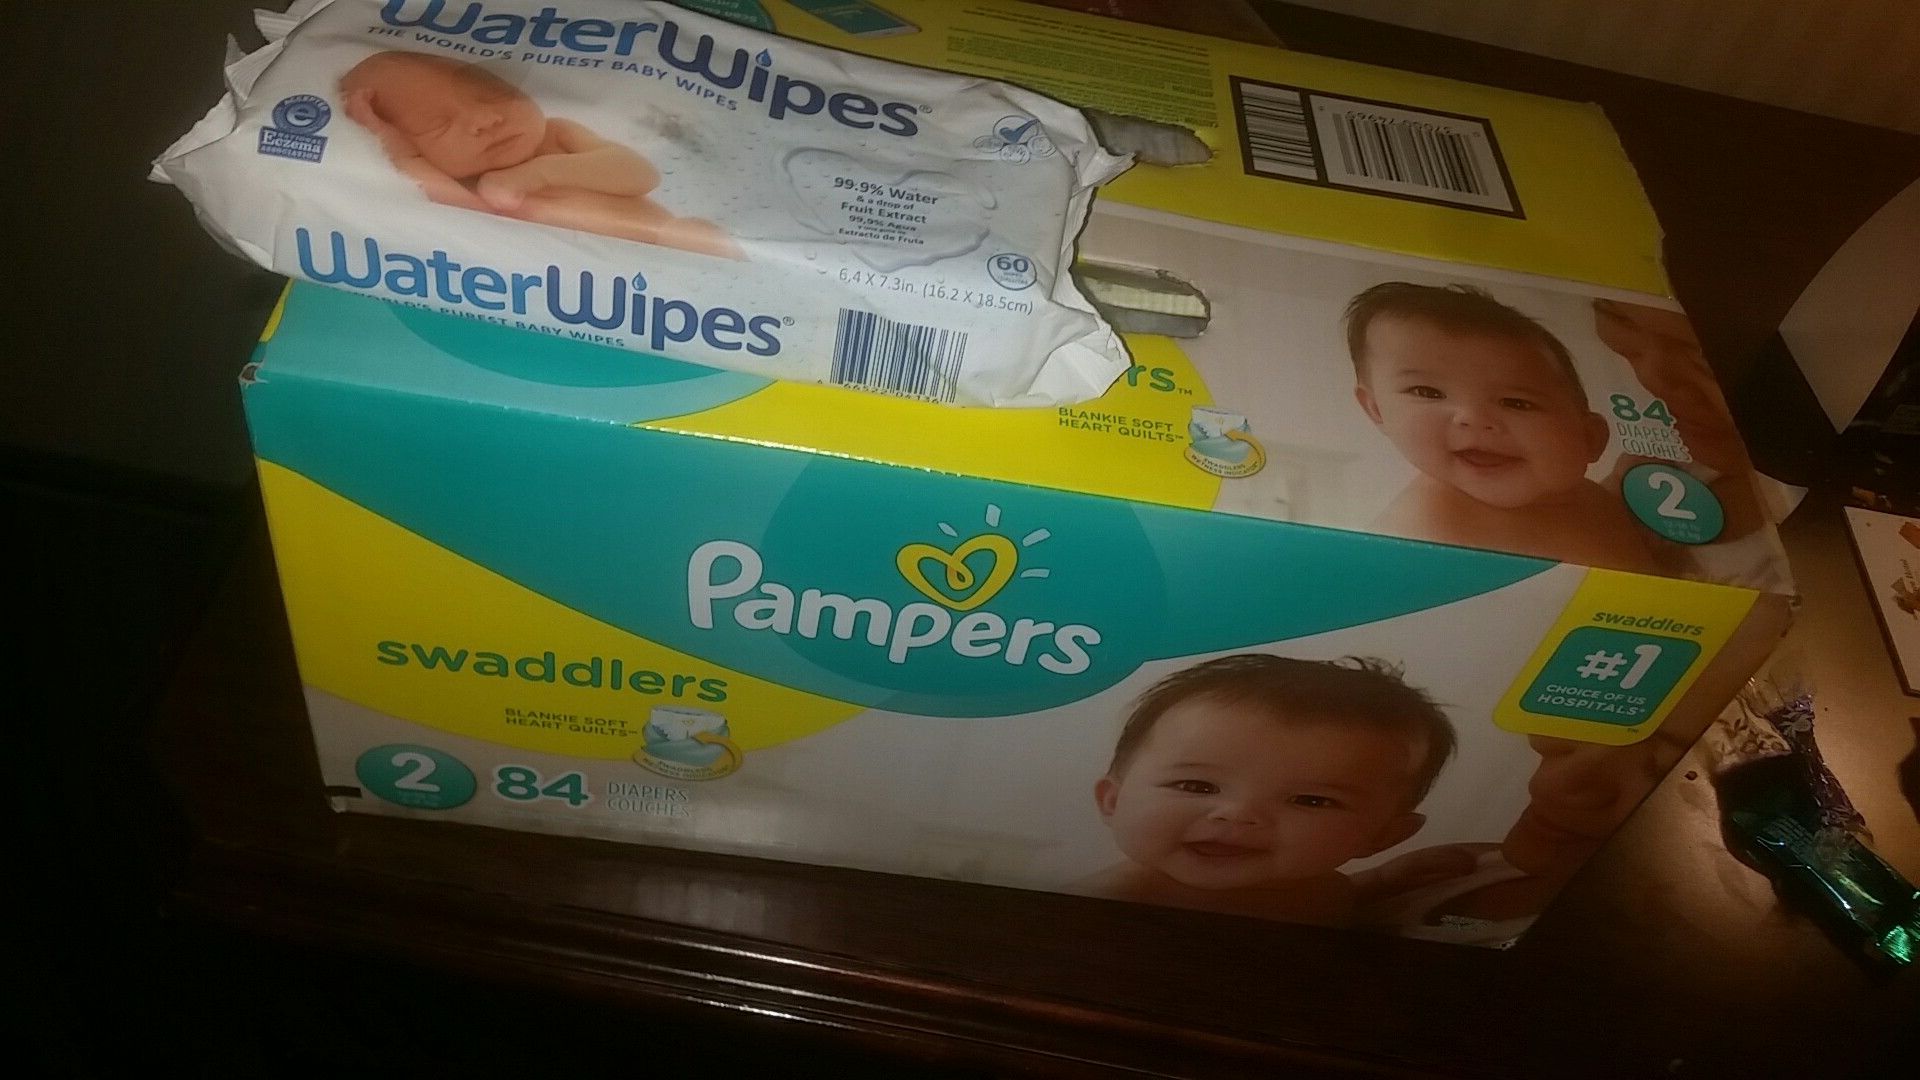 Brand new Pamper swaddlers and wips